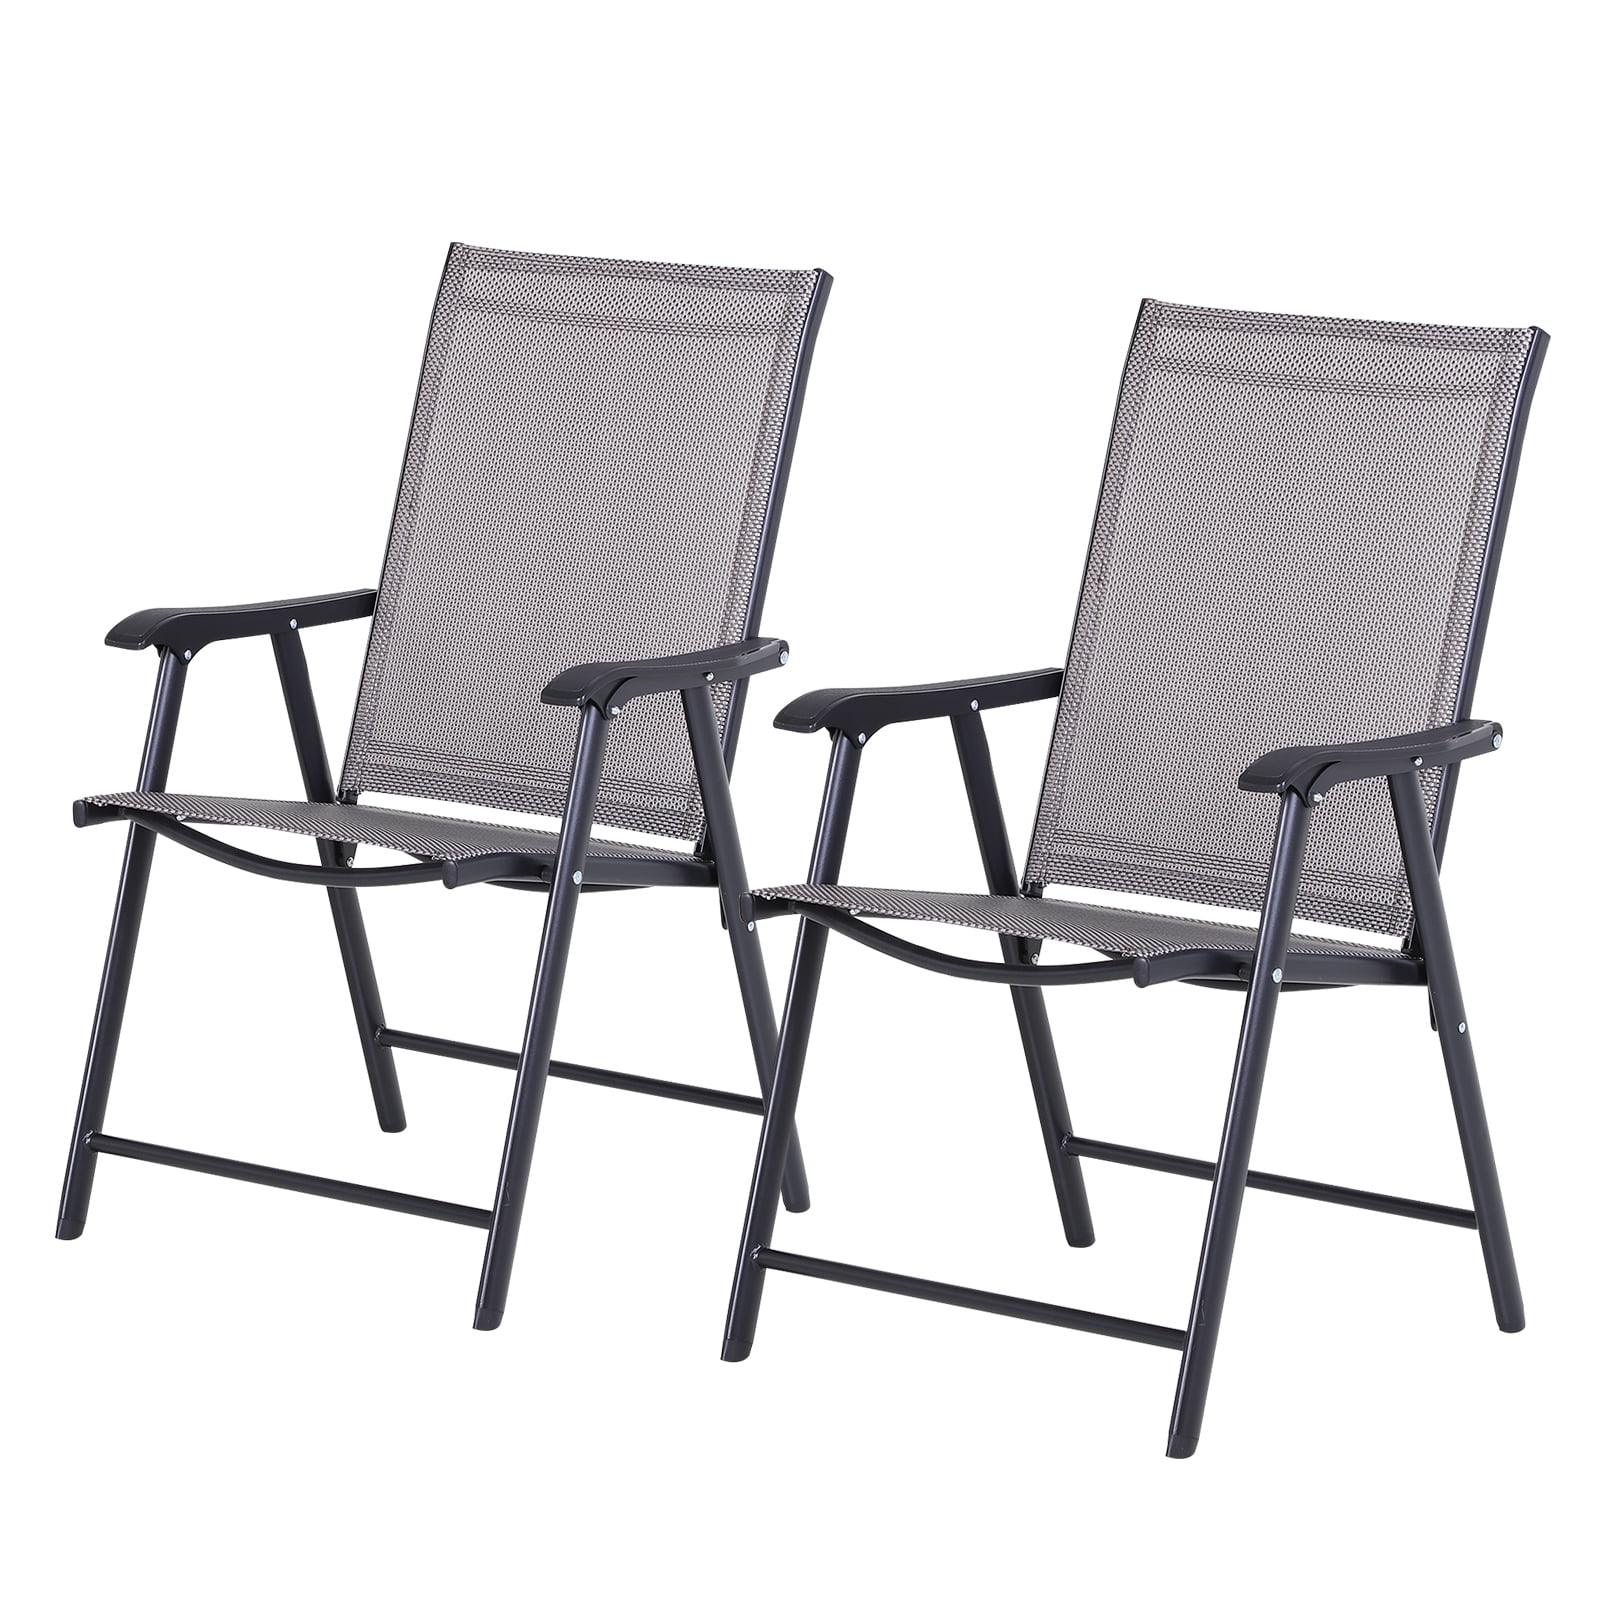 Camping and Travel Outsunny Folding Outdoor Patio Chairs Set of 4 Stackable Portable for Deck Garden 